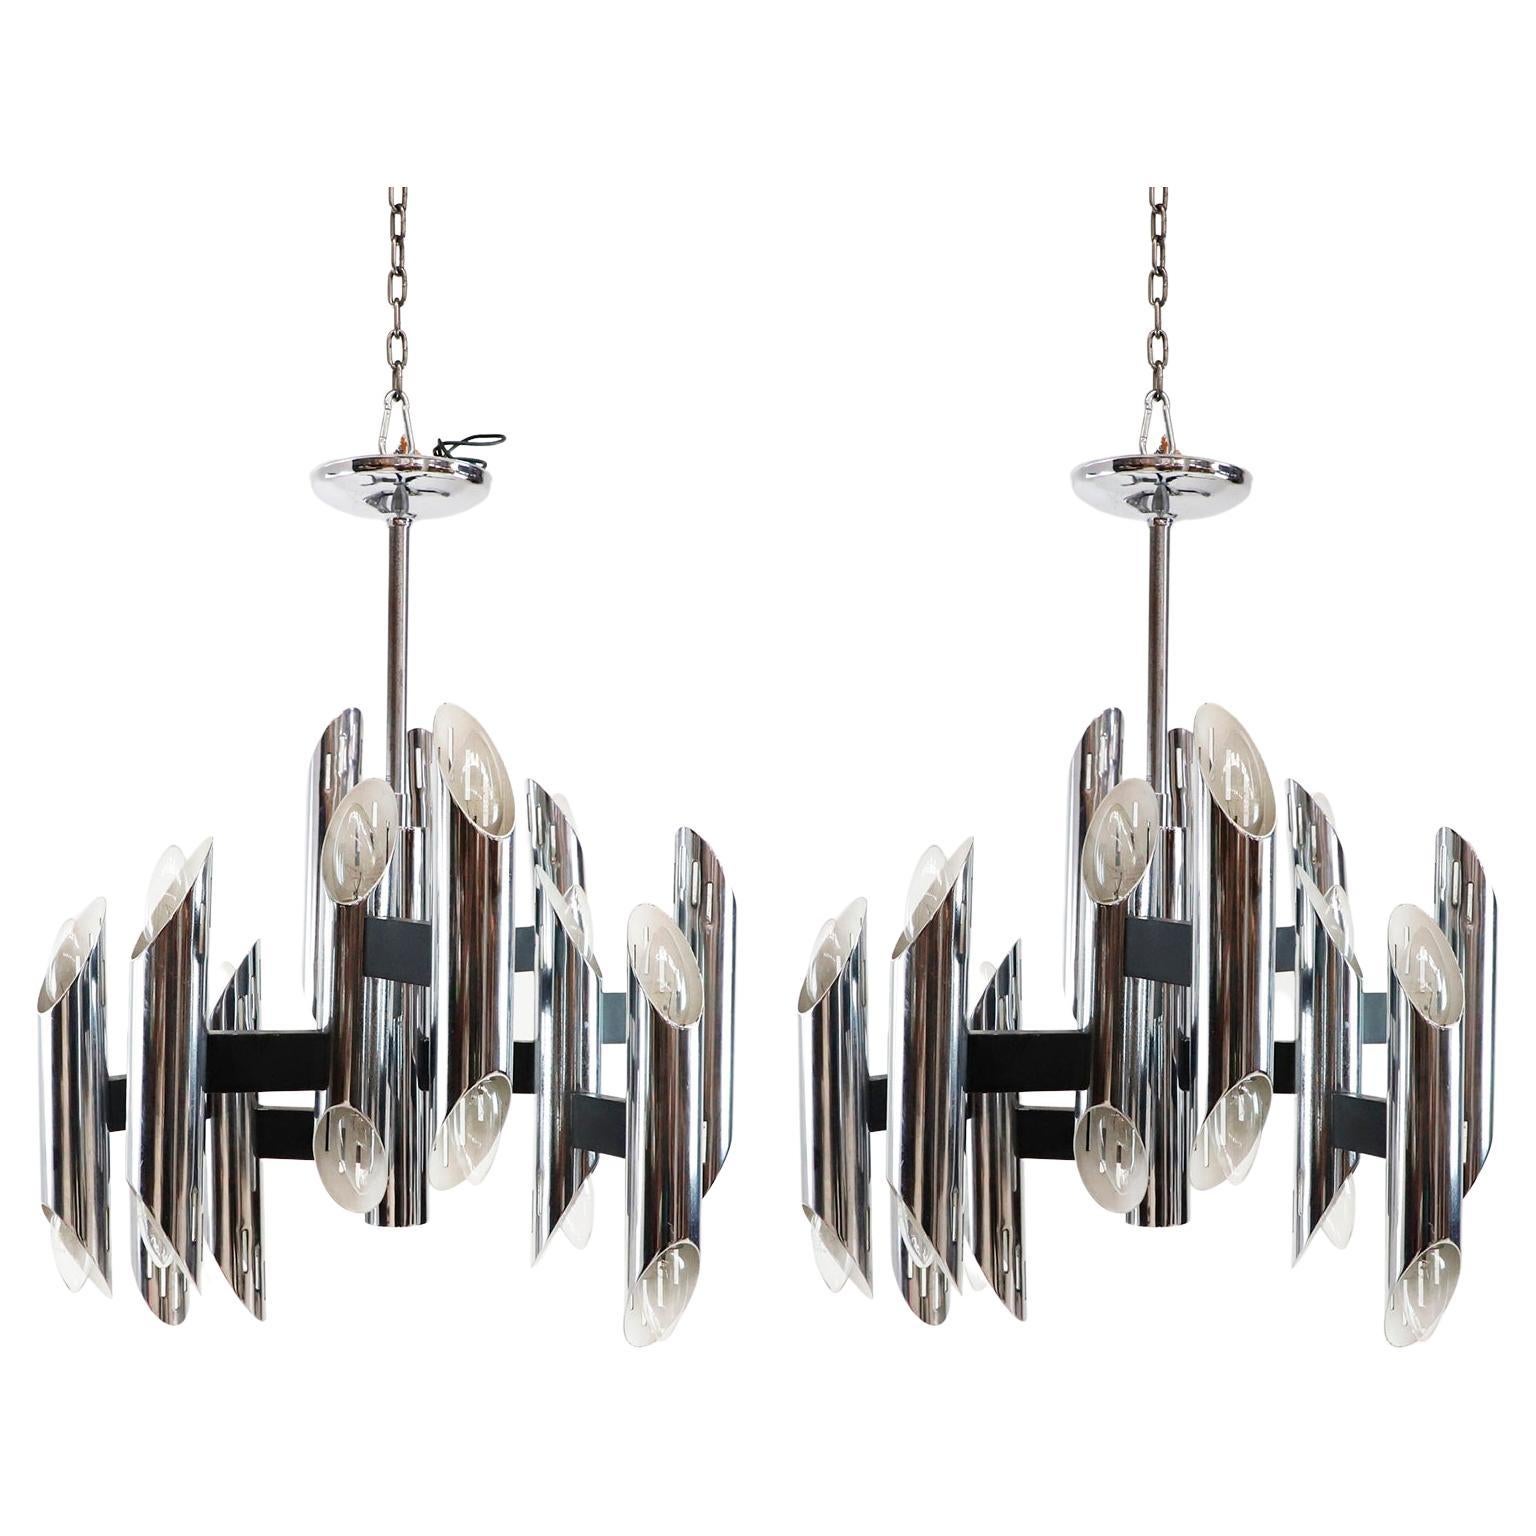 Pair of Midcentury Chrome Chandeliers For Sale